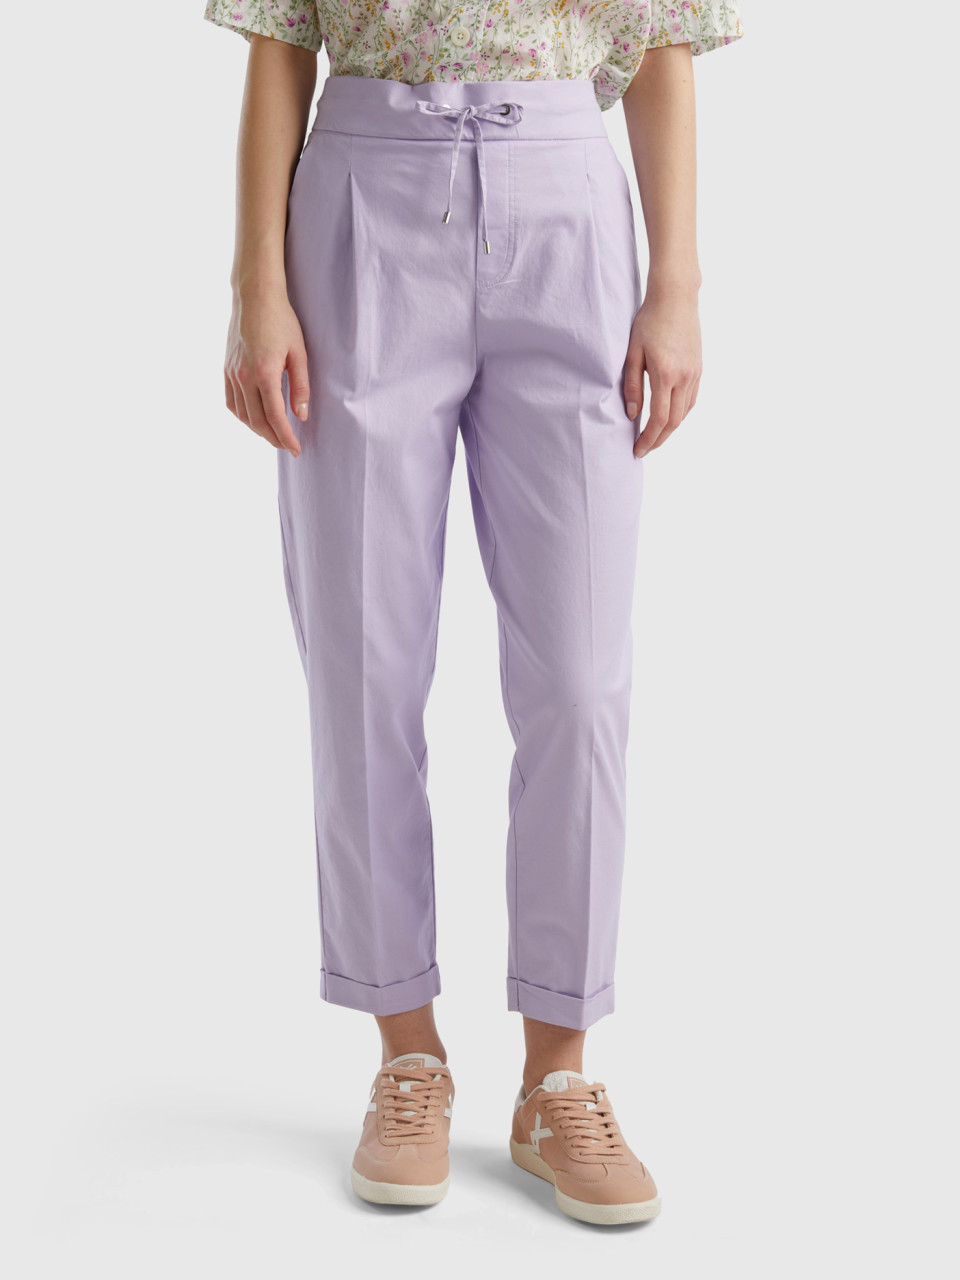 Benetton, Joggers In Stretch Cotton, Lilac, Women